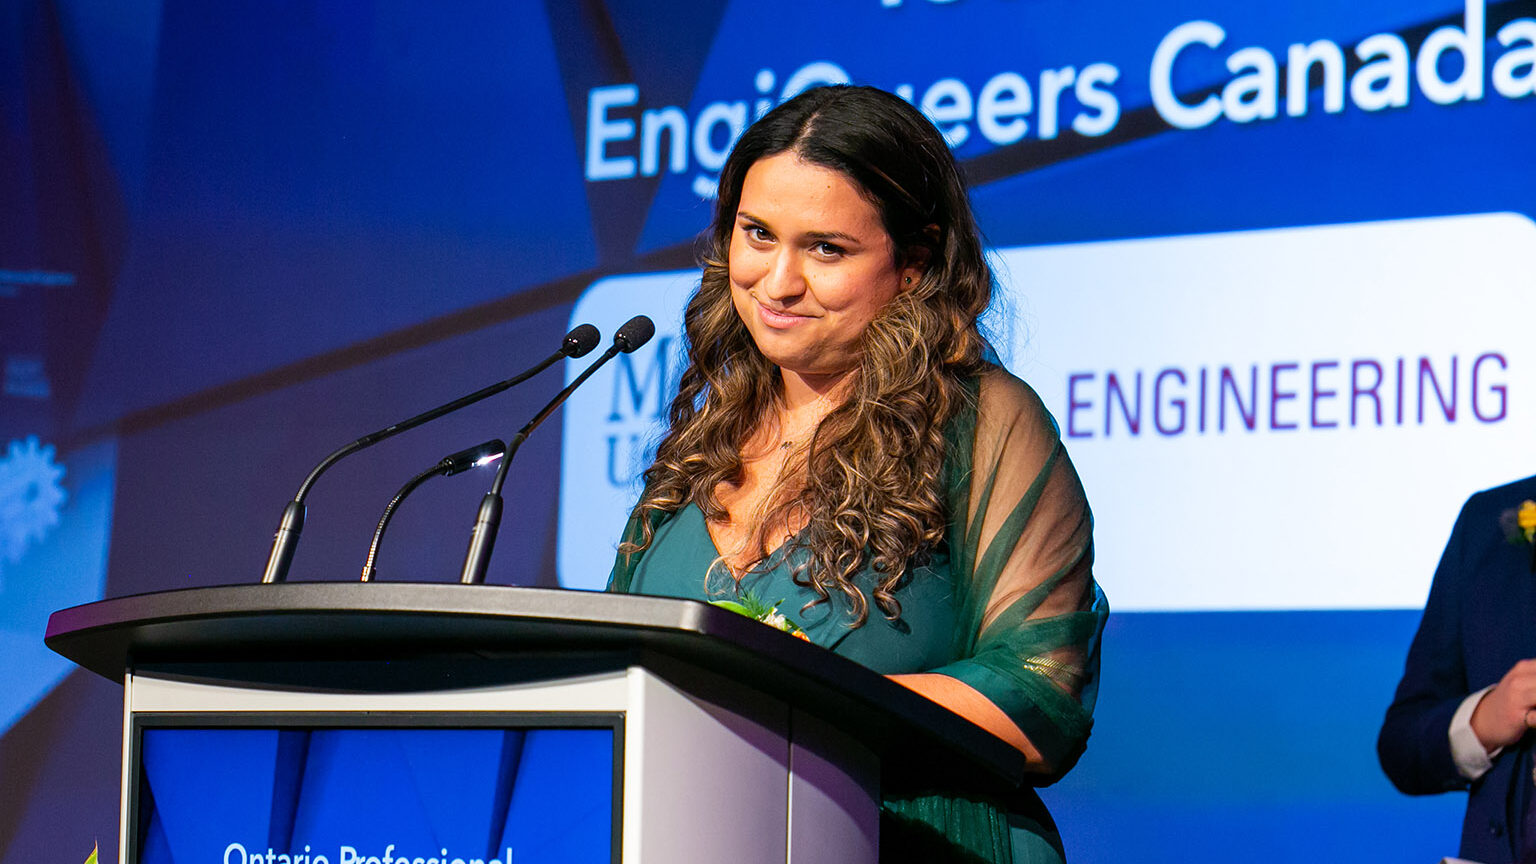 Vanessa Raponi accepting an award on stage